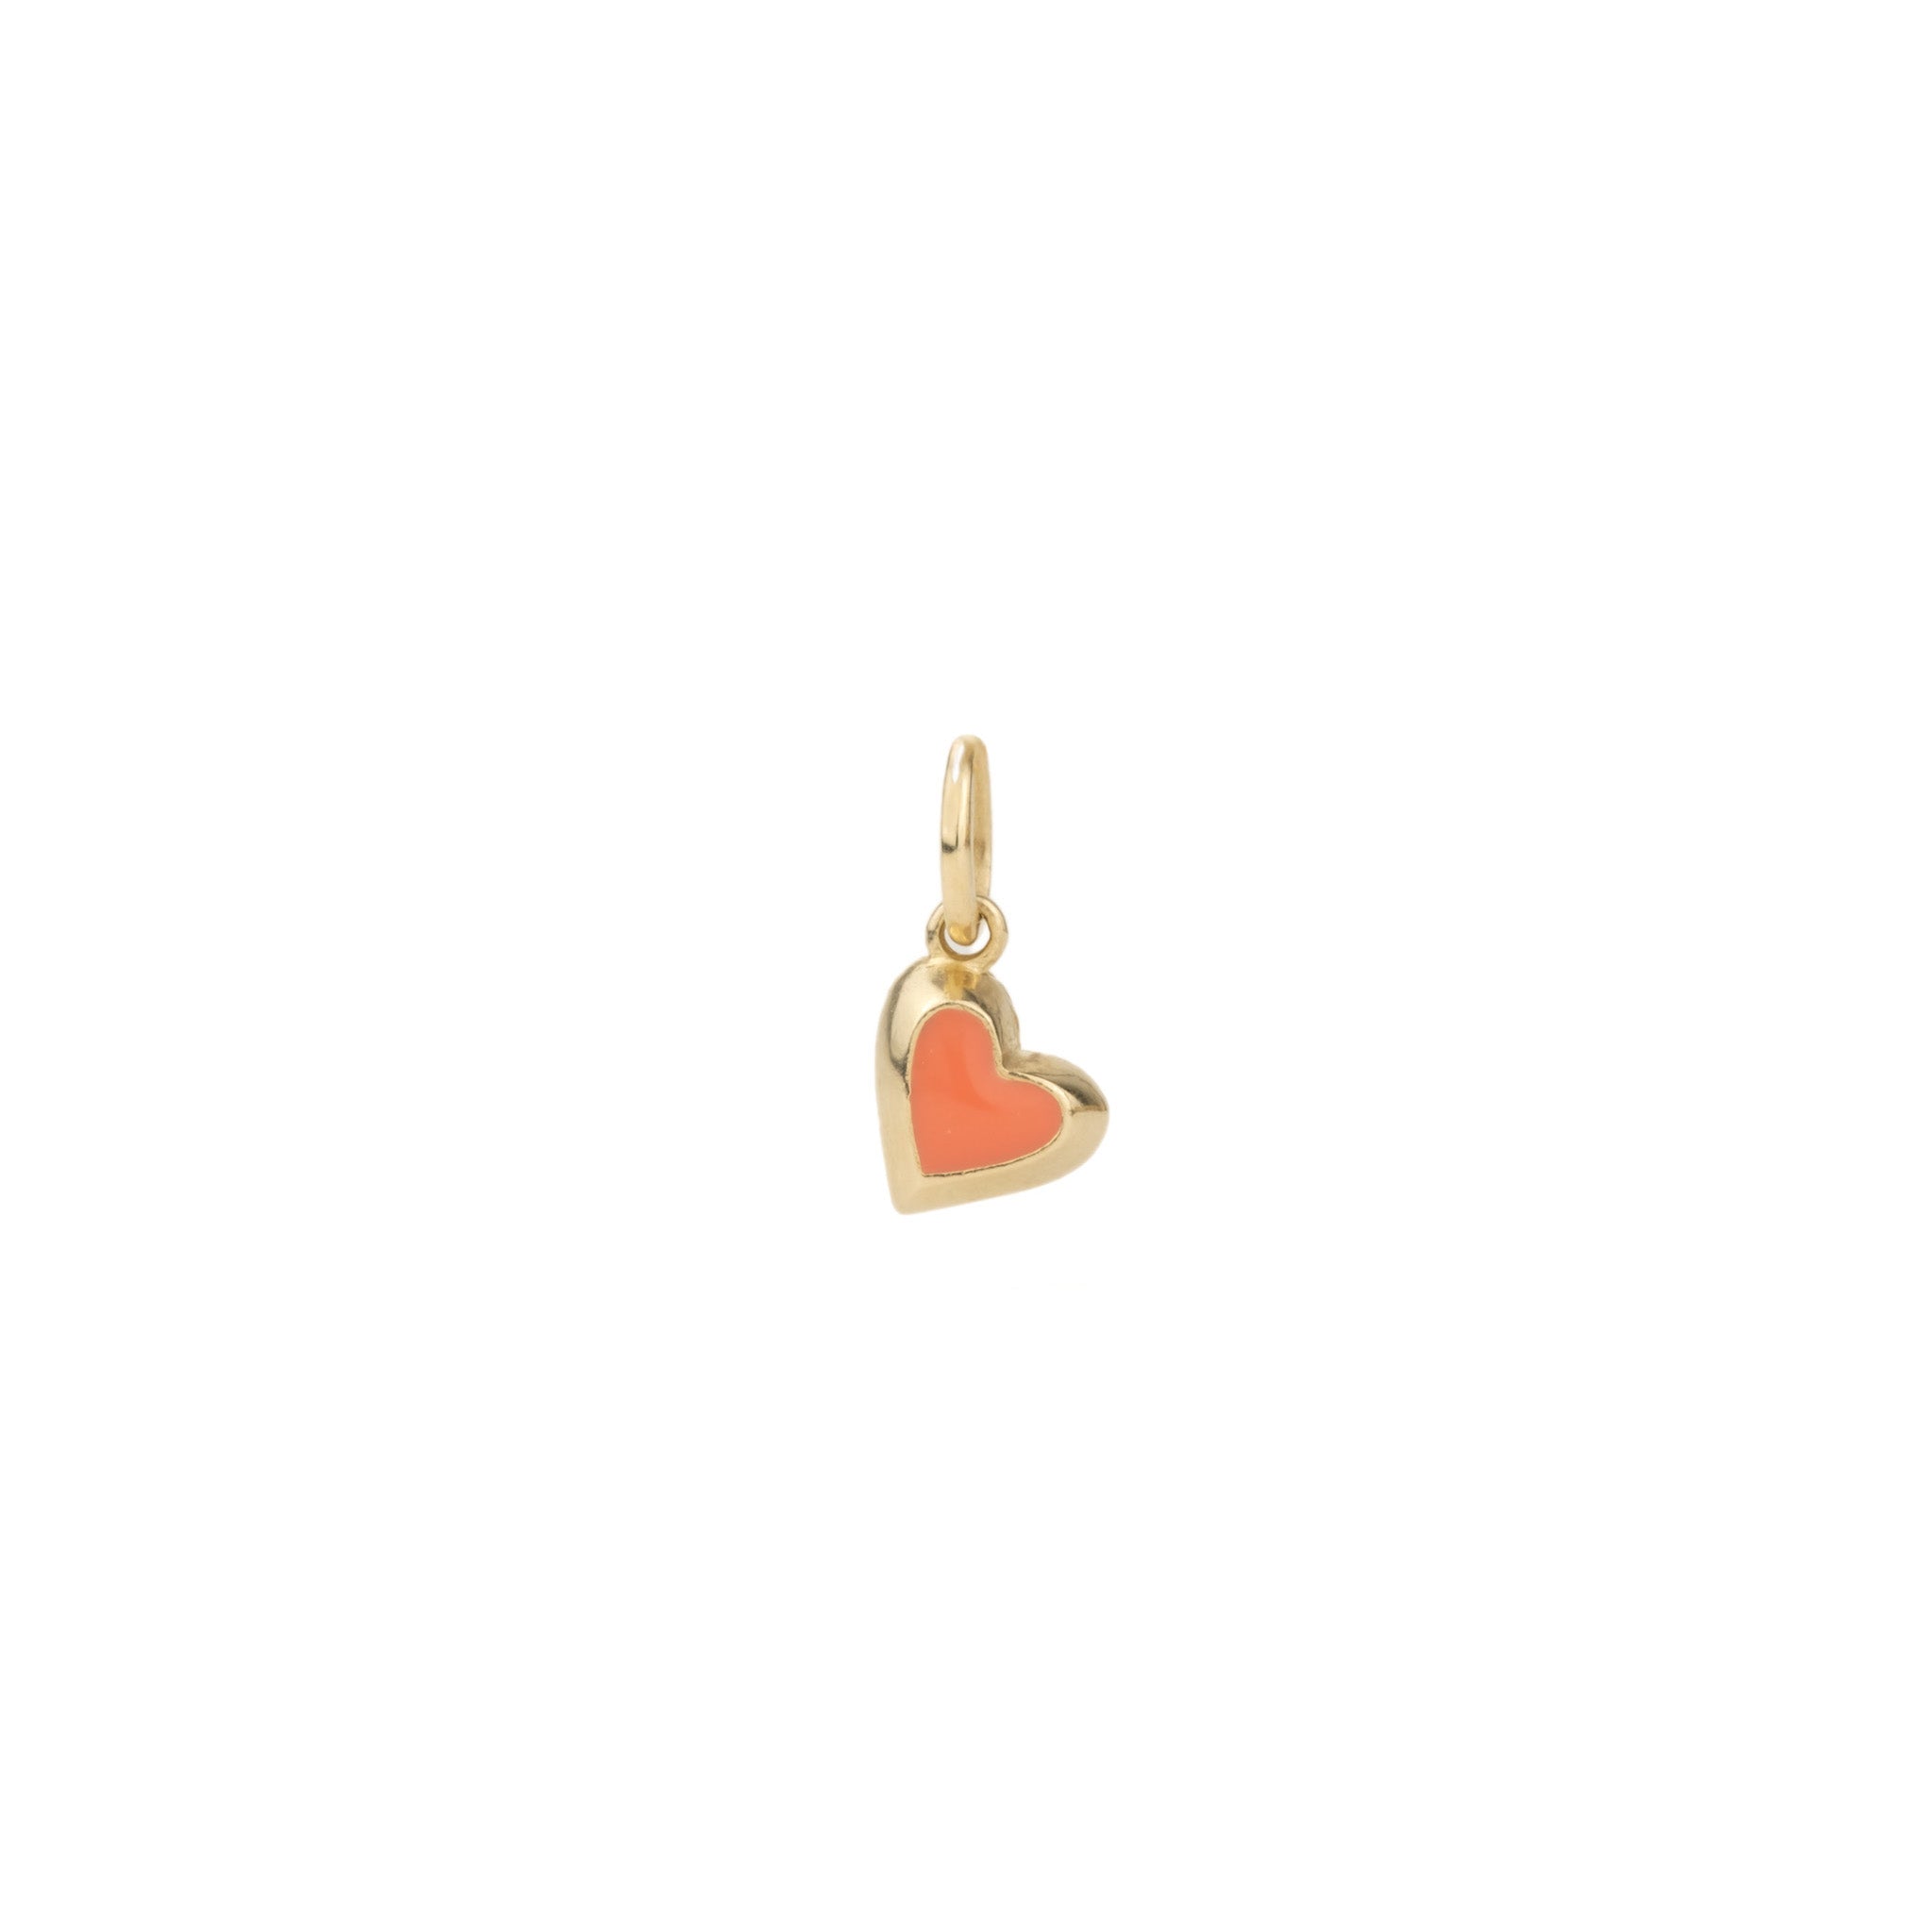 Aiden Jae's solid yellow gold reversible heart charm pendant with coral colored enamel on a white background.